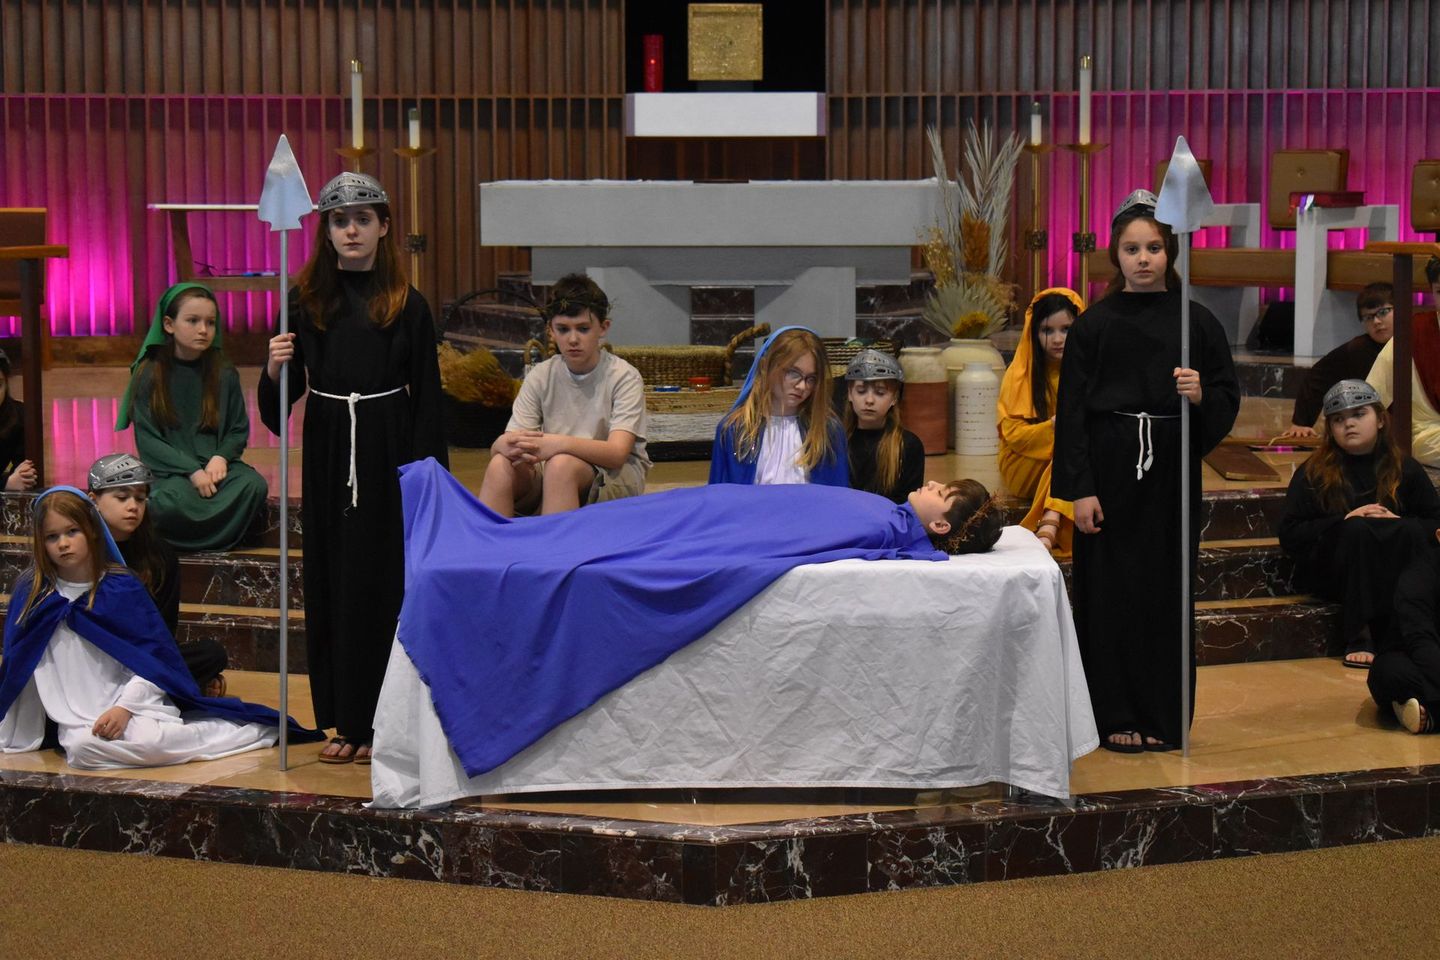 A group of children are standing around a jesus laying on a bed